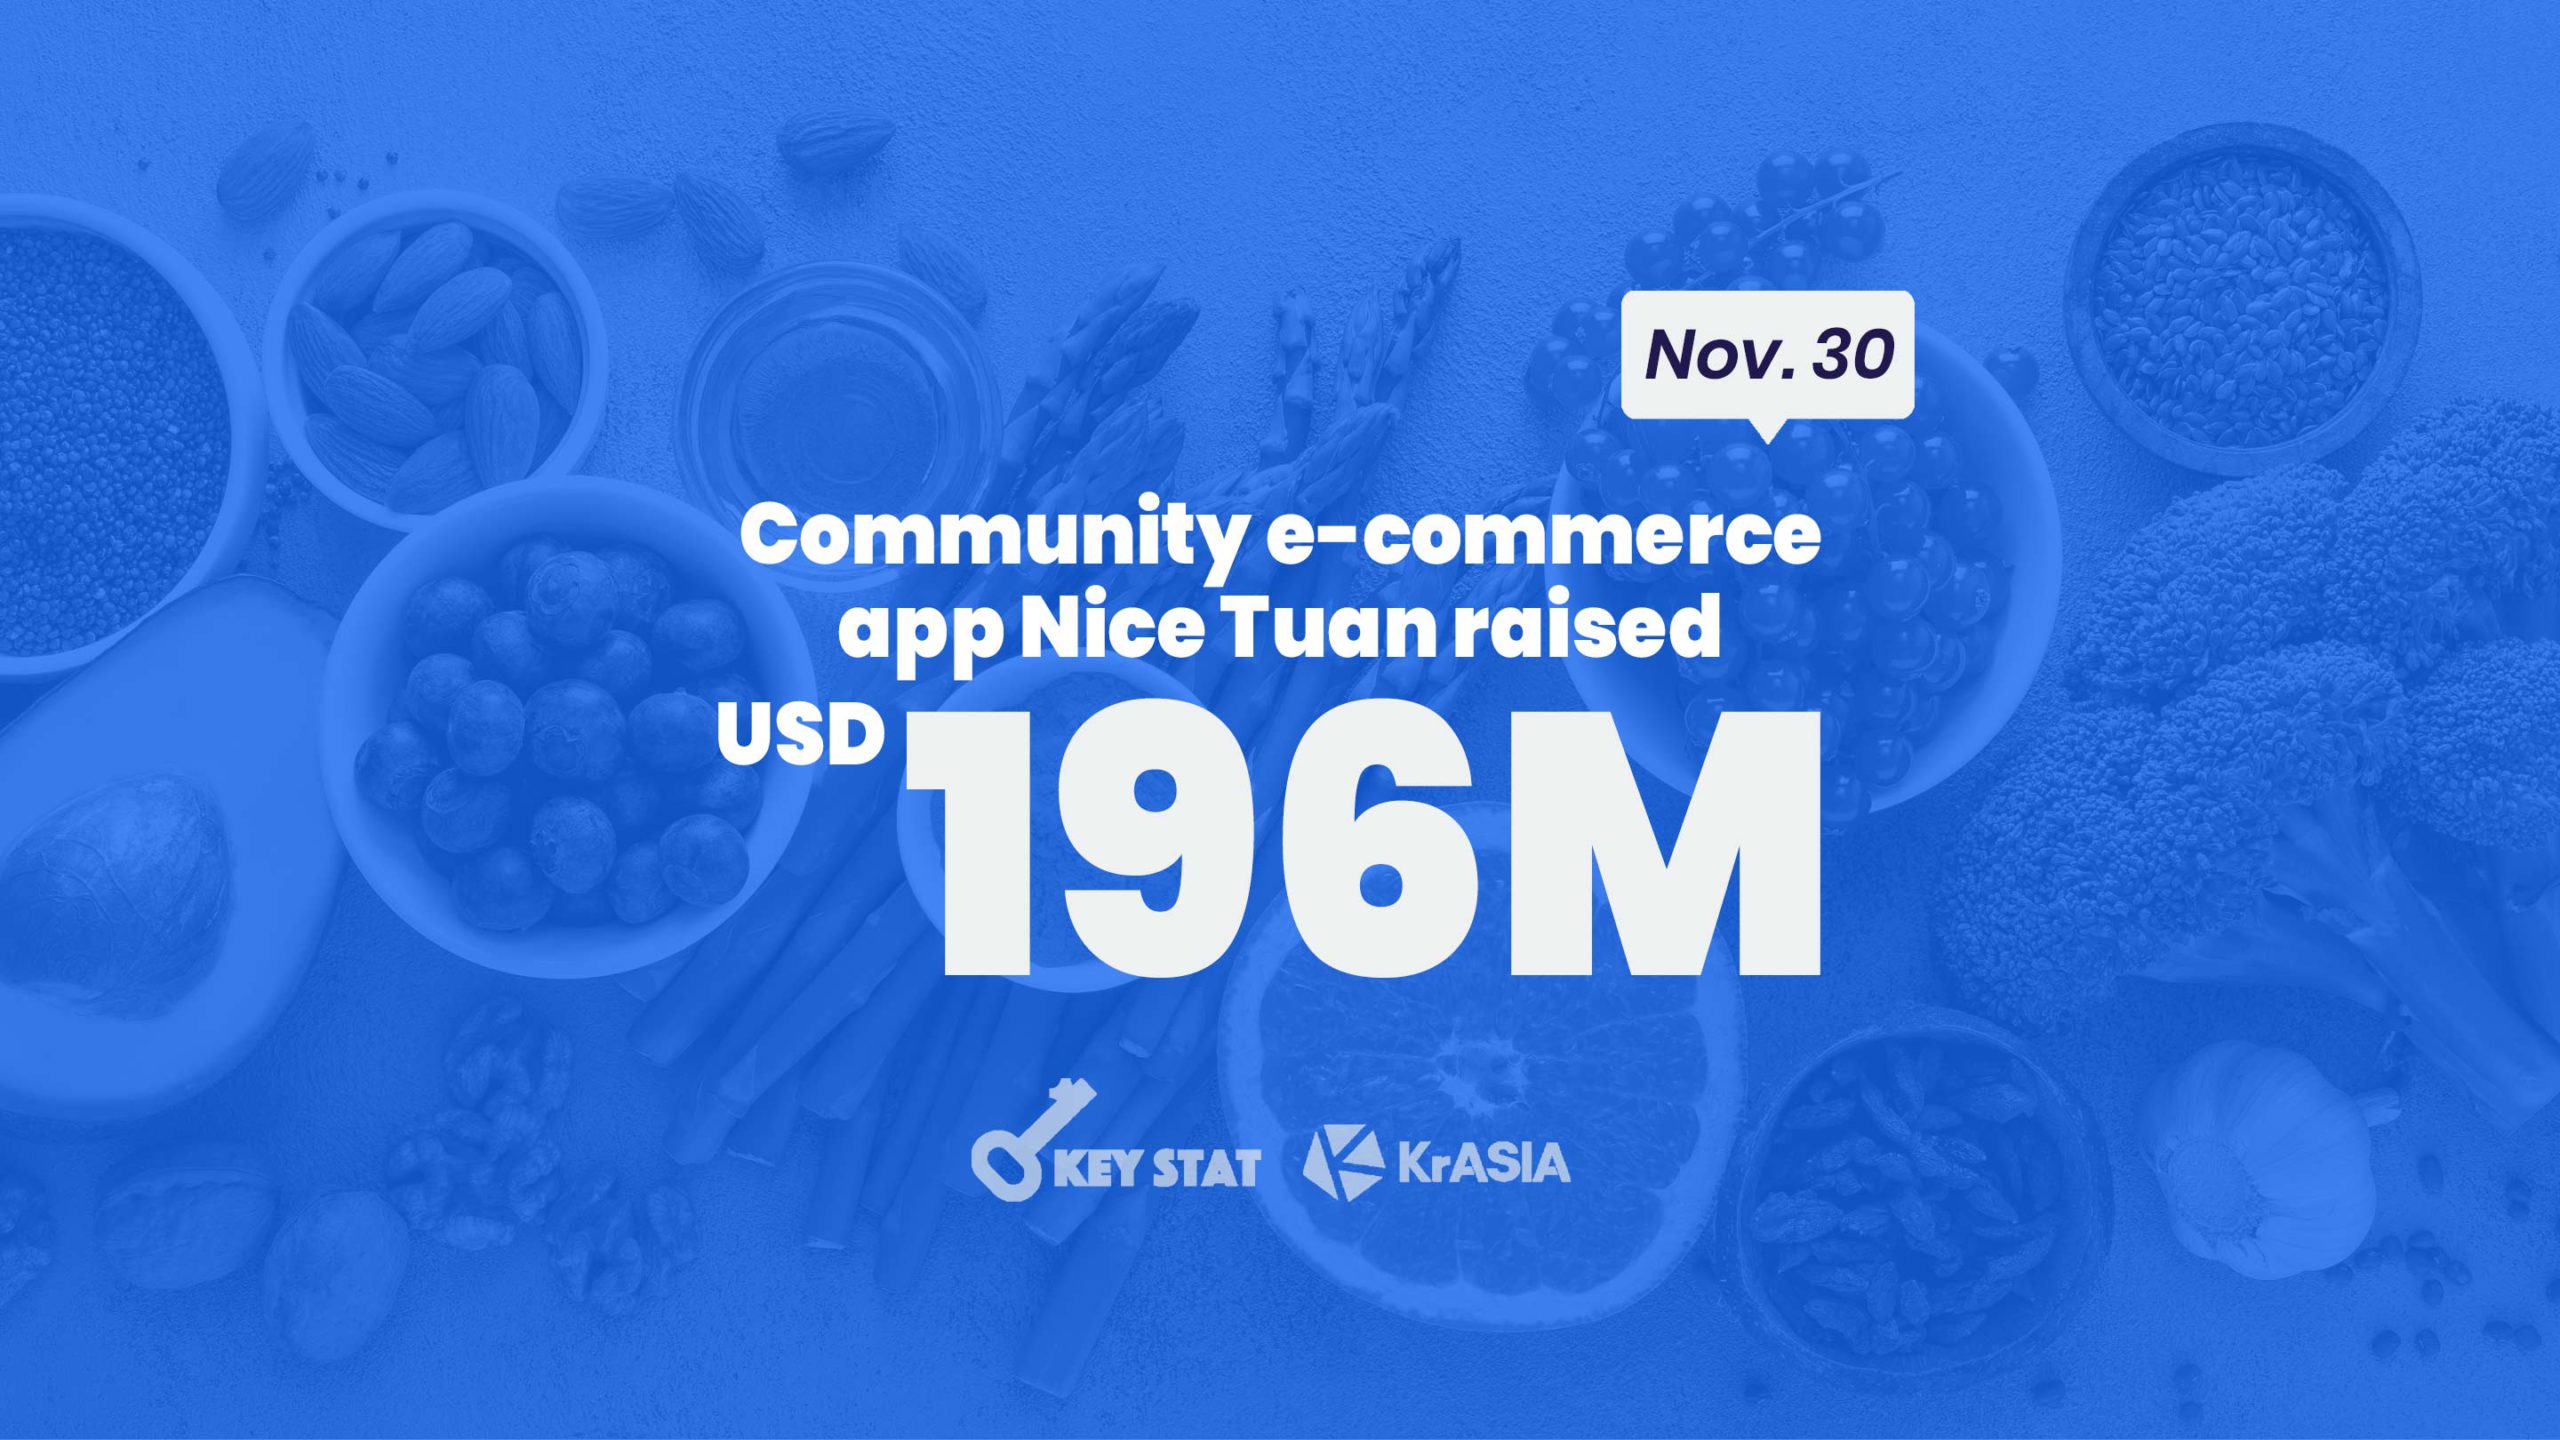 KEY STAT | Social e-commerce startup Nice Tuan closes its fourth fundraising round in 2020